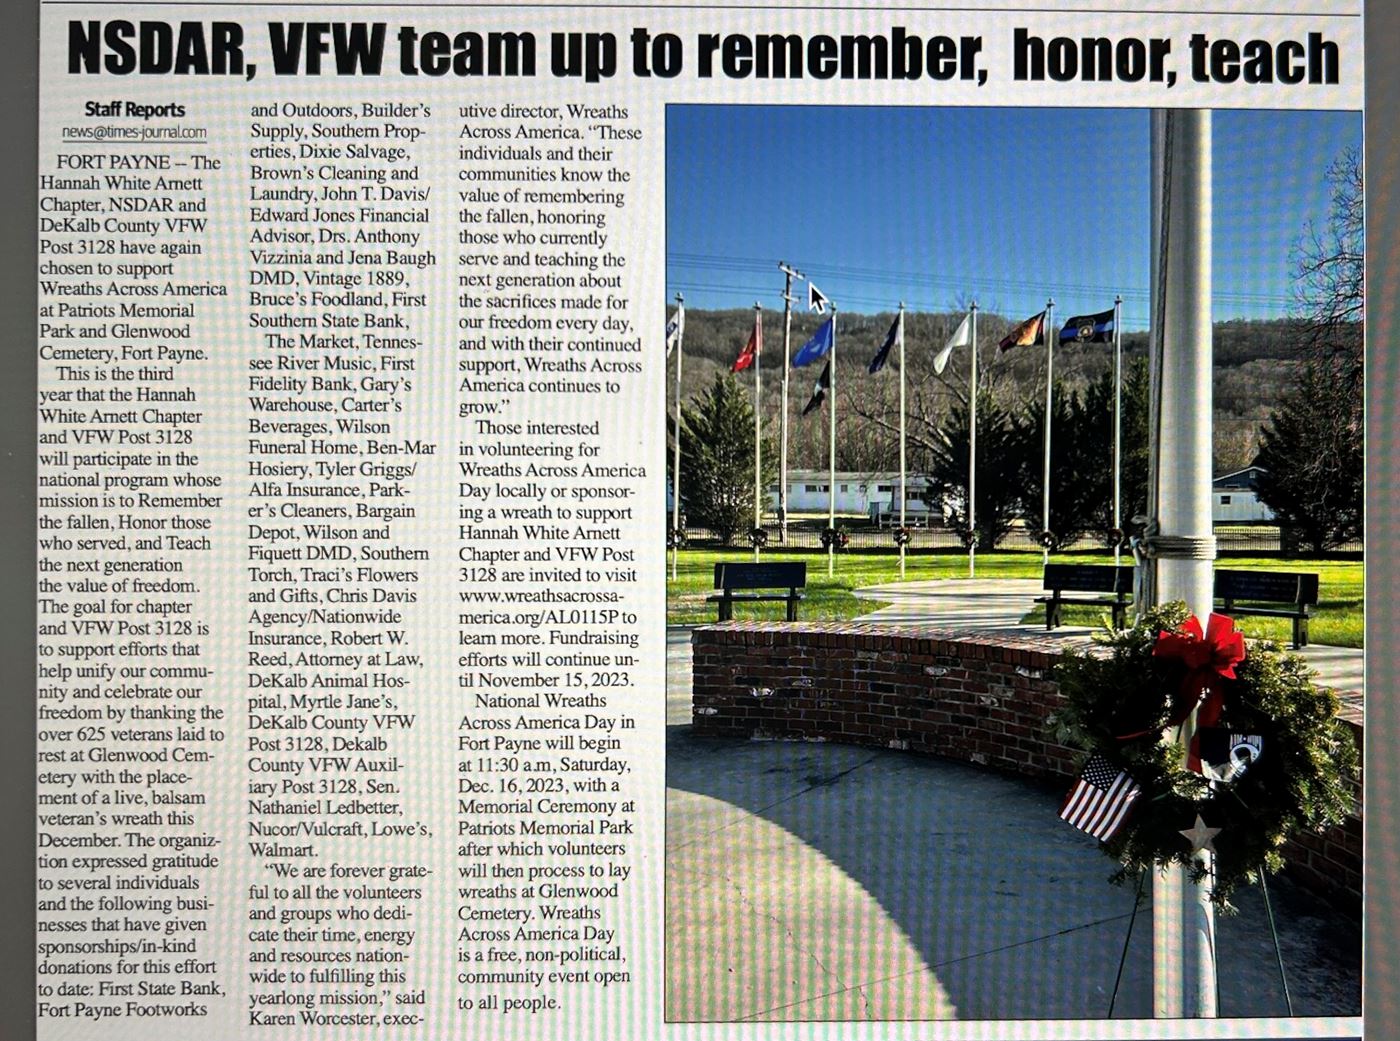 Times-Journal article published 11/15/23 featuring WAA Day event in Fort Payne, AL<div><br></div>